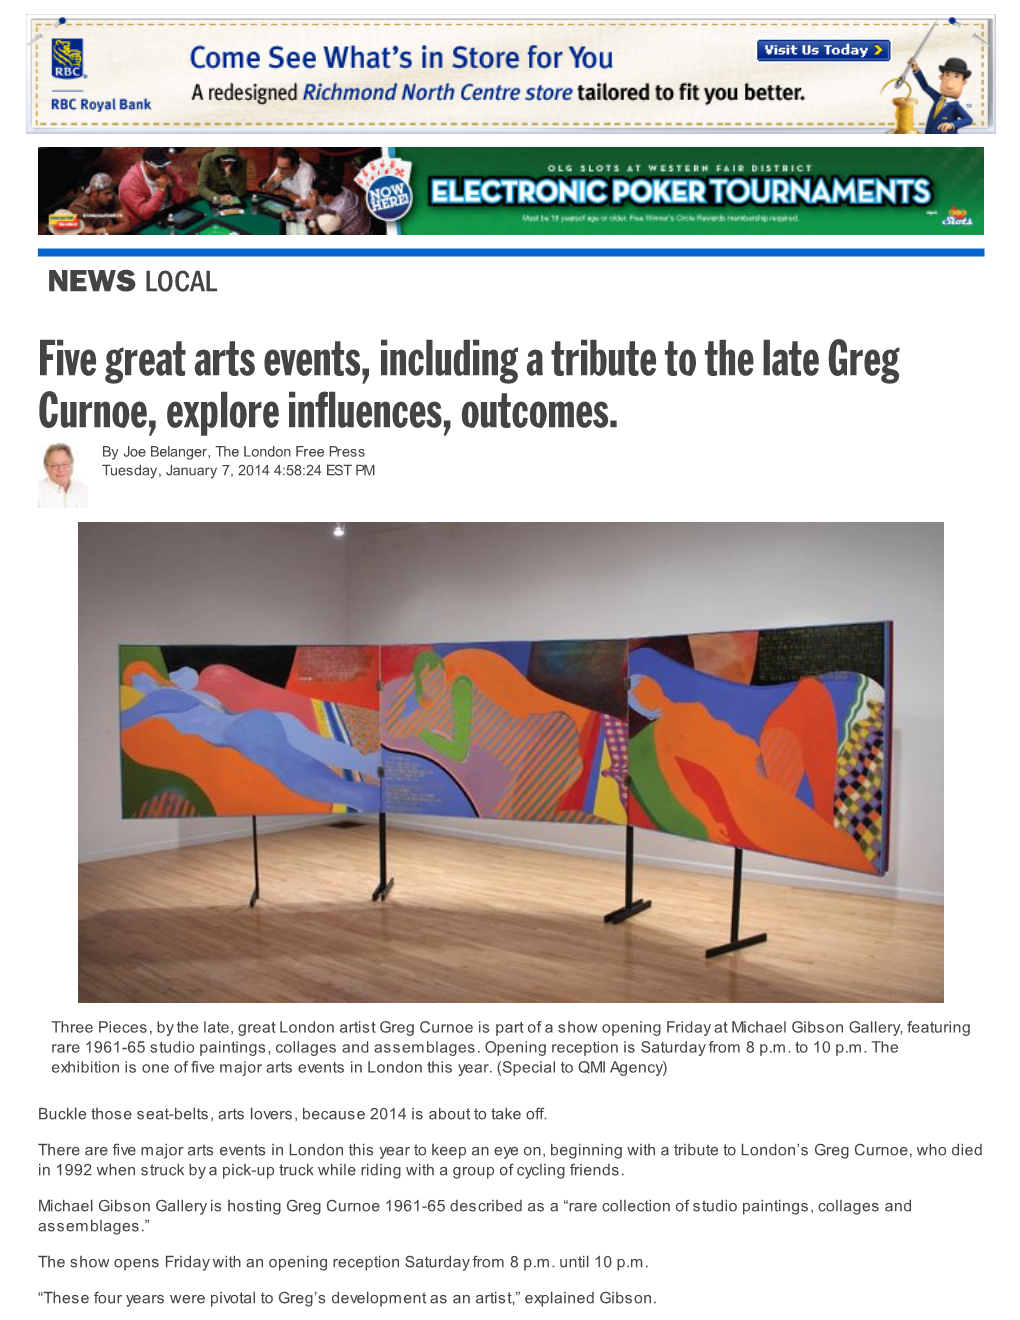 Five Great Arts Events, Including a Tribute to the Late Greg Curnoe, Explore Influences, Outcomes